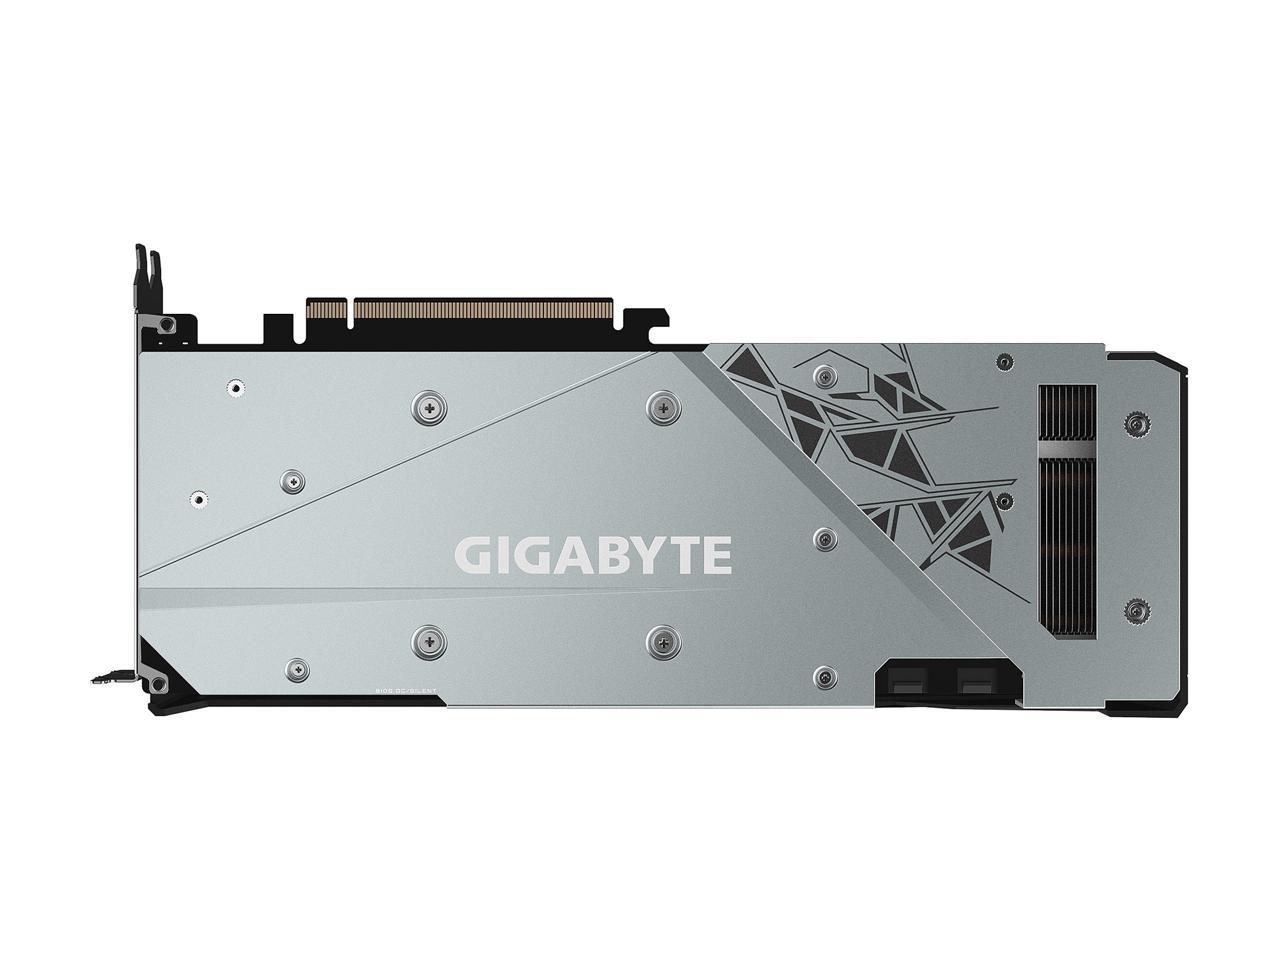 GIGABYTE Radeon RX 6800 GAMING OC 16GB Graphics Card w/ The Last of Us Game Bundle $455 + Free Shipping